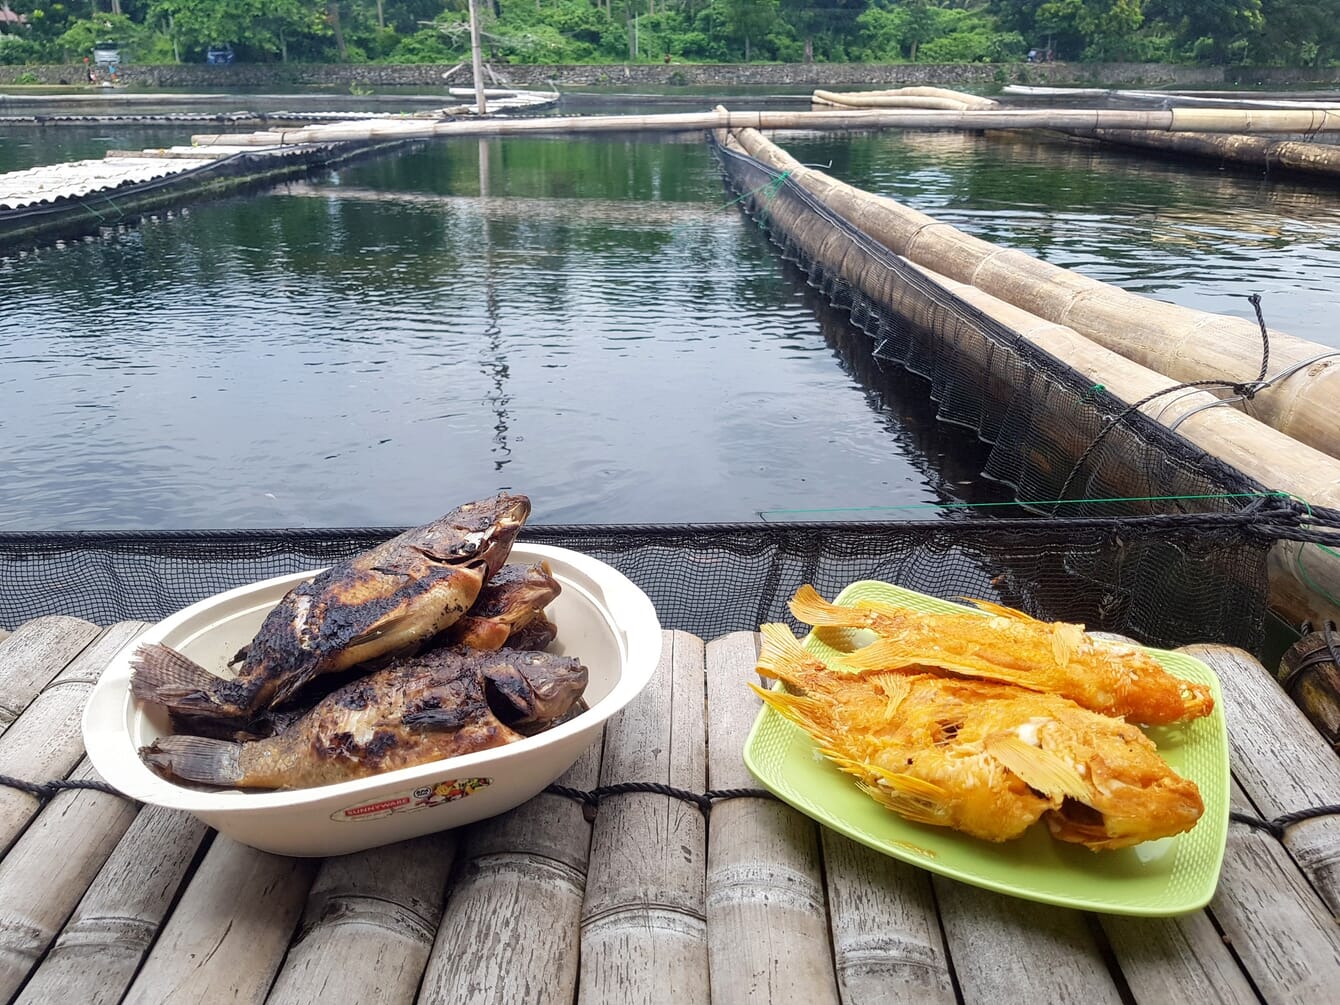 Two different types of cooked fish in bowls beside a fish farm.